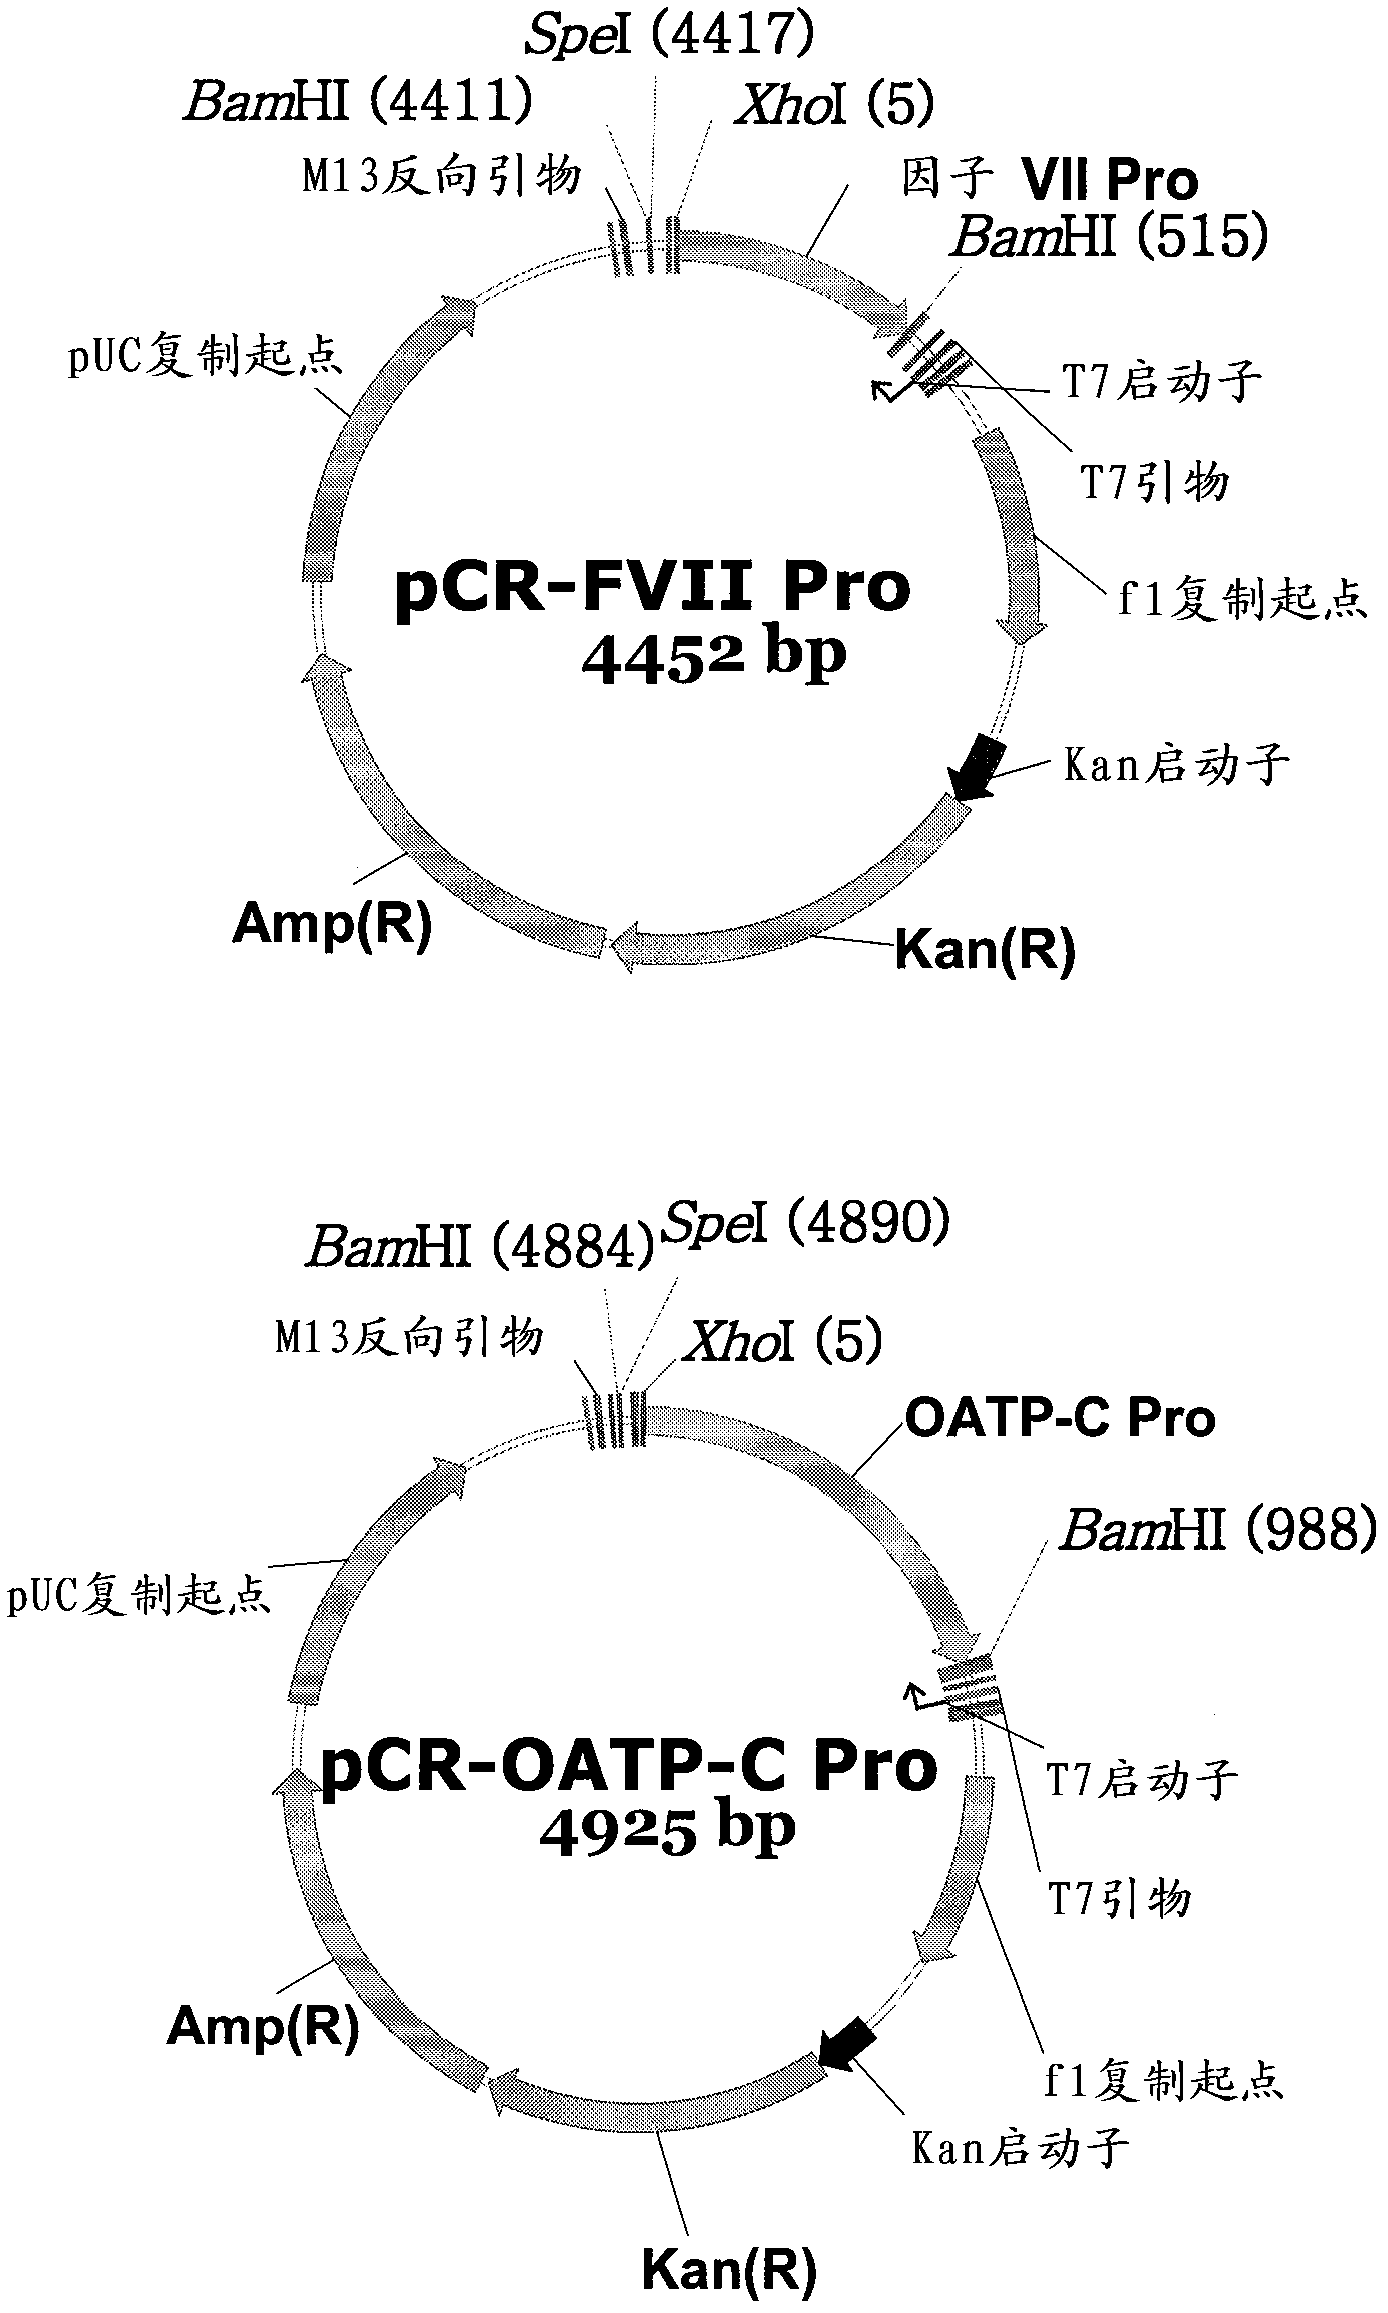 Expression vector suitable for expressing coded sequence used for gene therapy